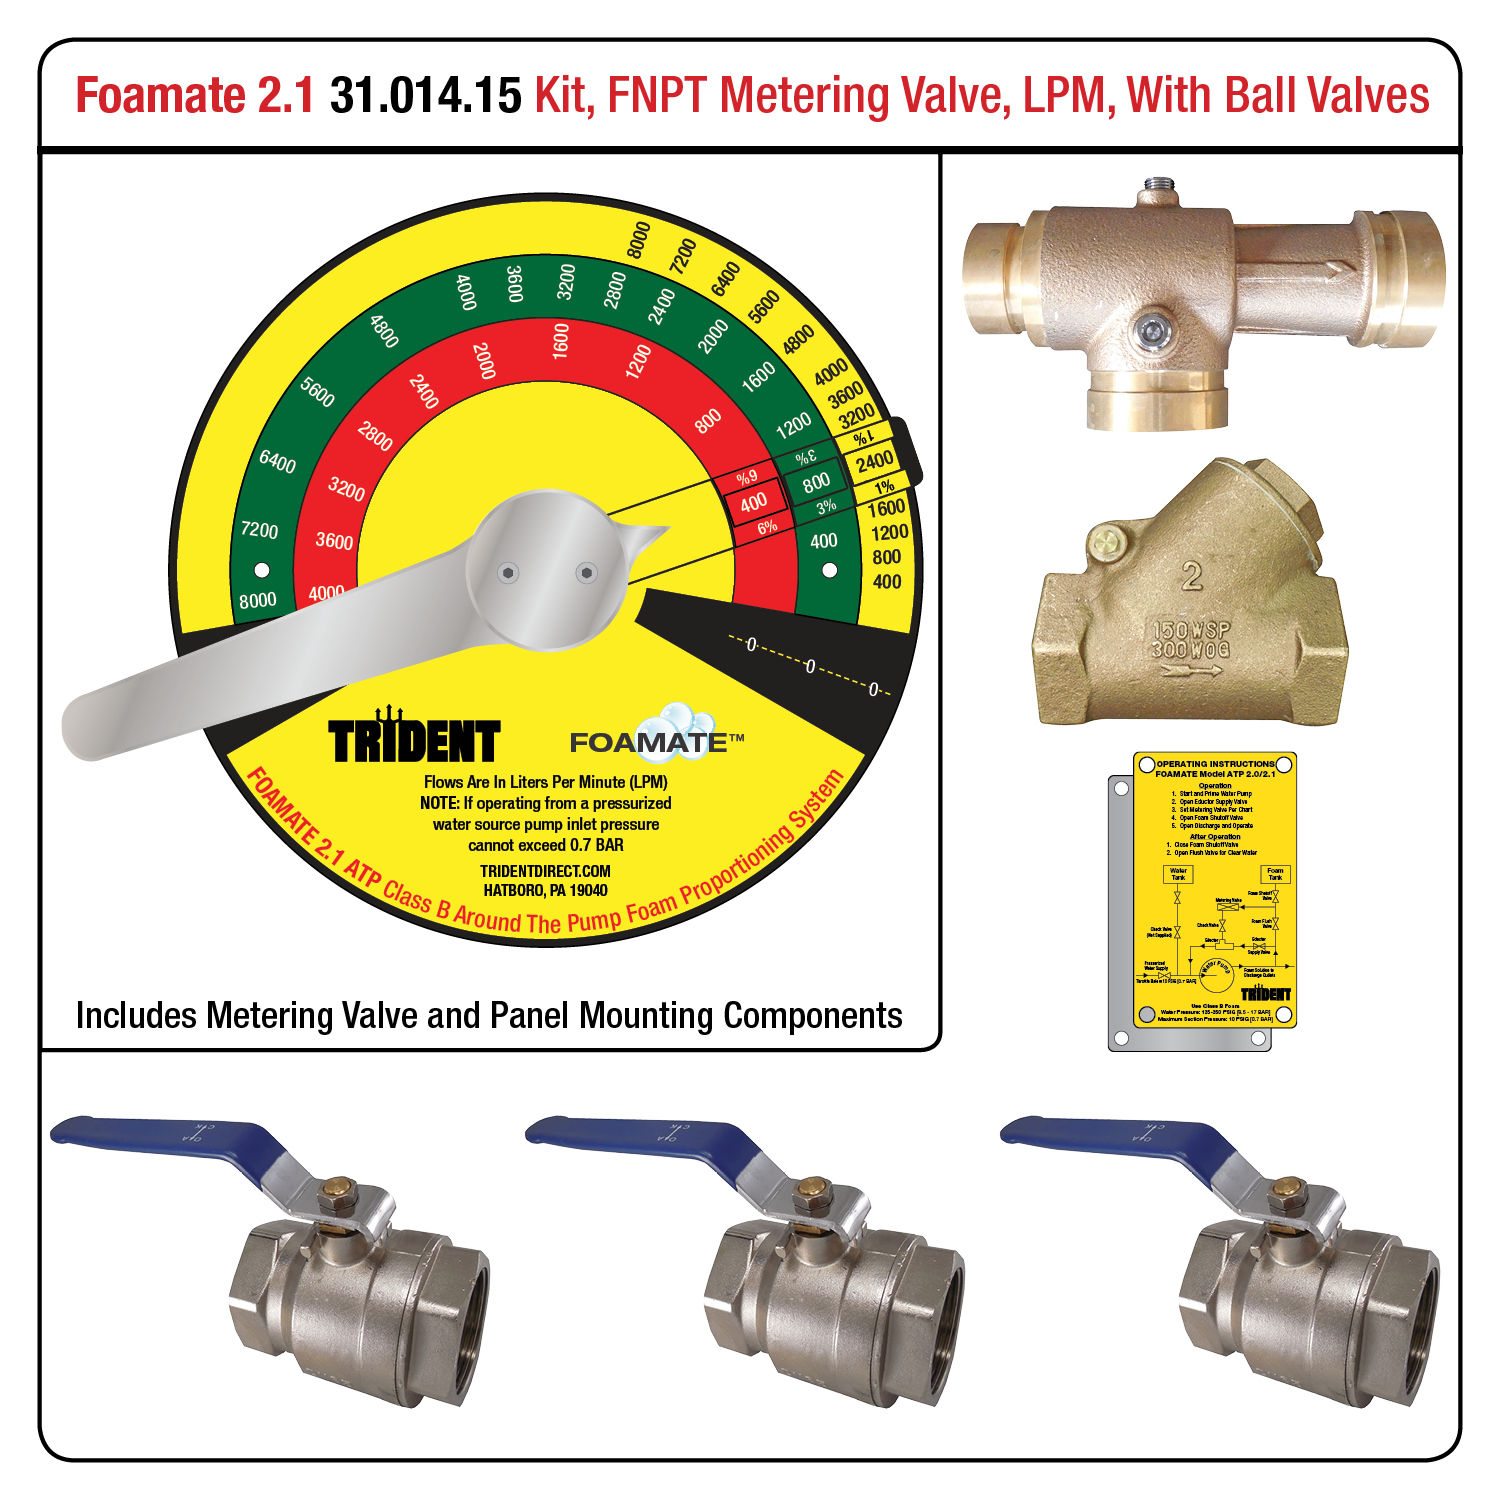 Foamate 2.1 ATP System, Metering Valve with FNPT Ends, LPM Flow Rates, w/ Ball Valves